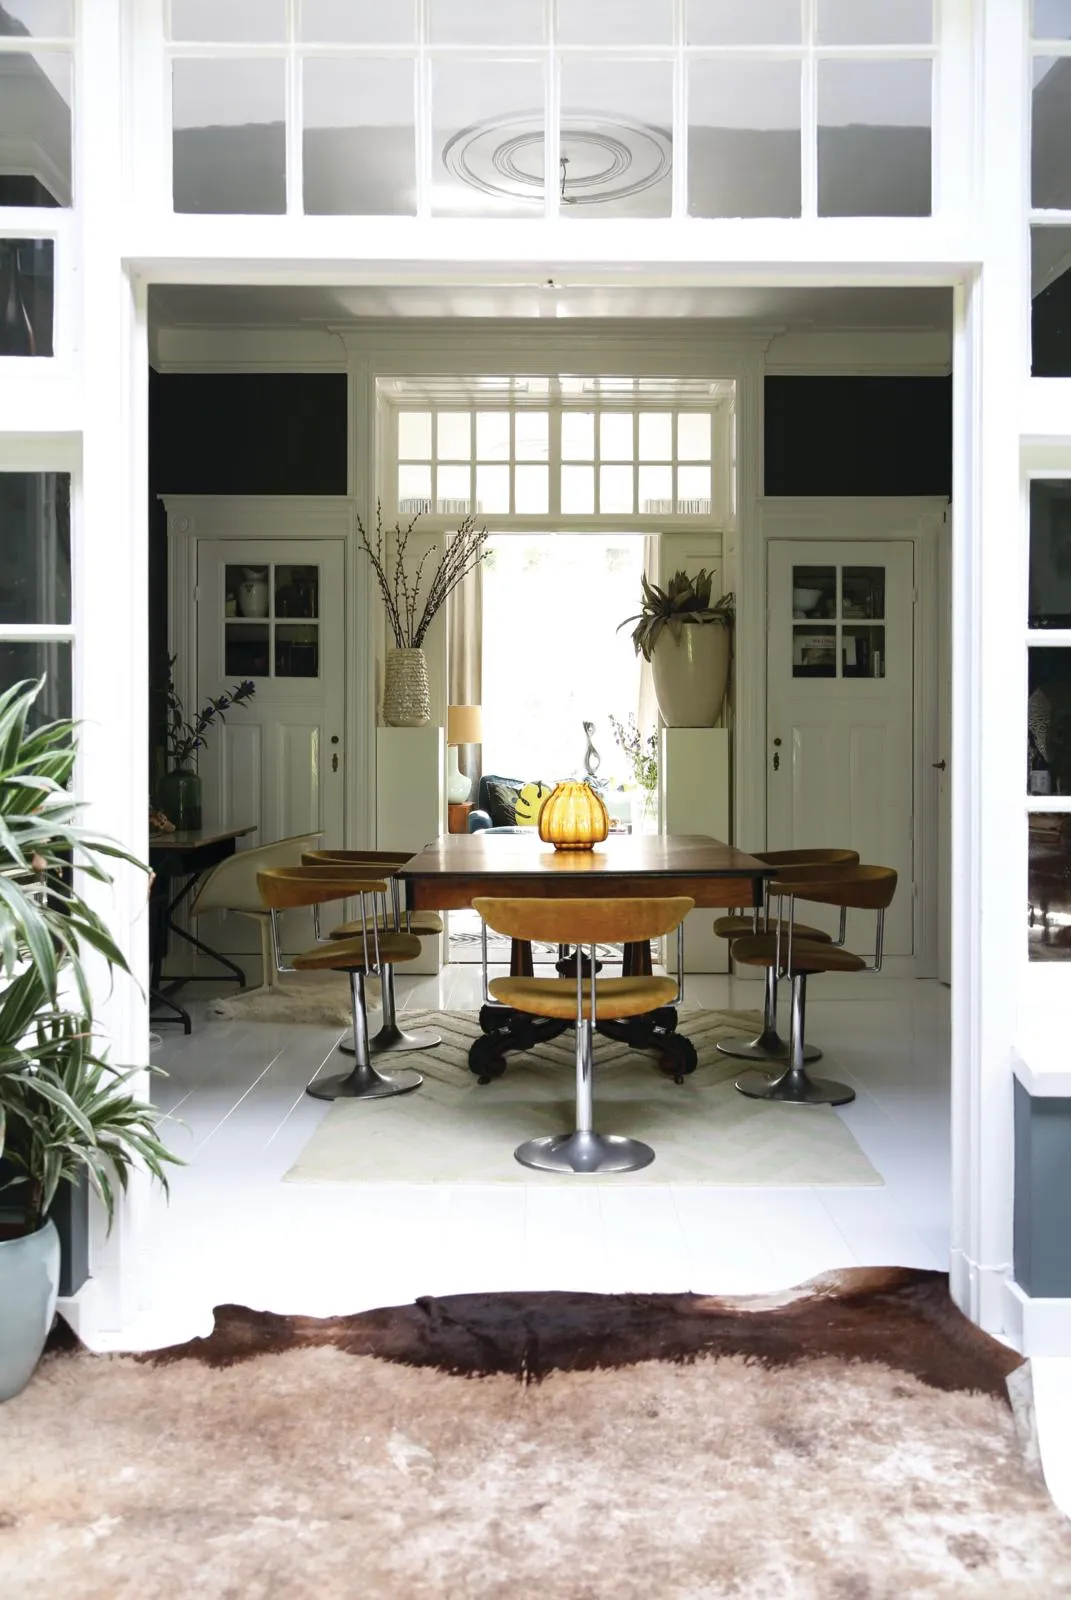 Dutch home, dining table and chairs.